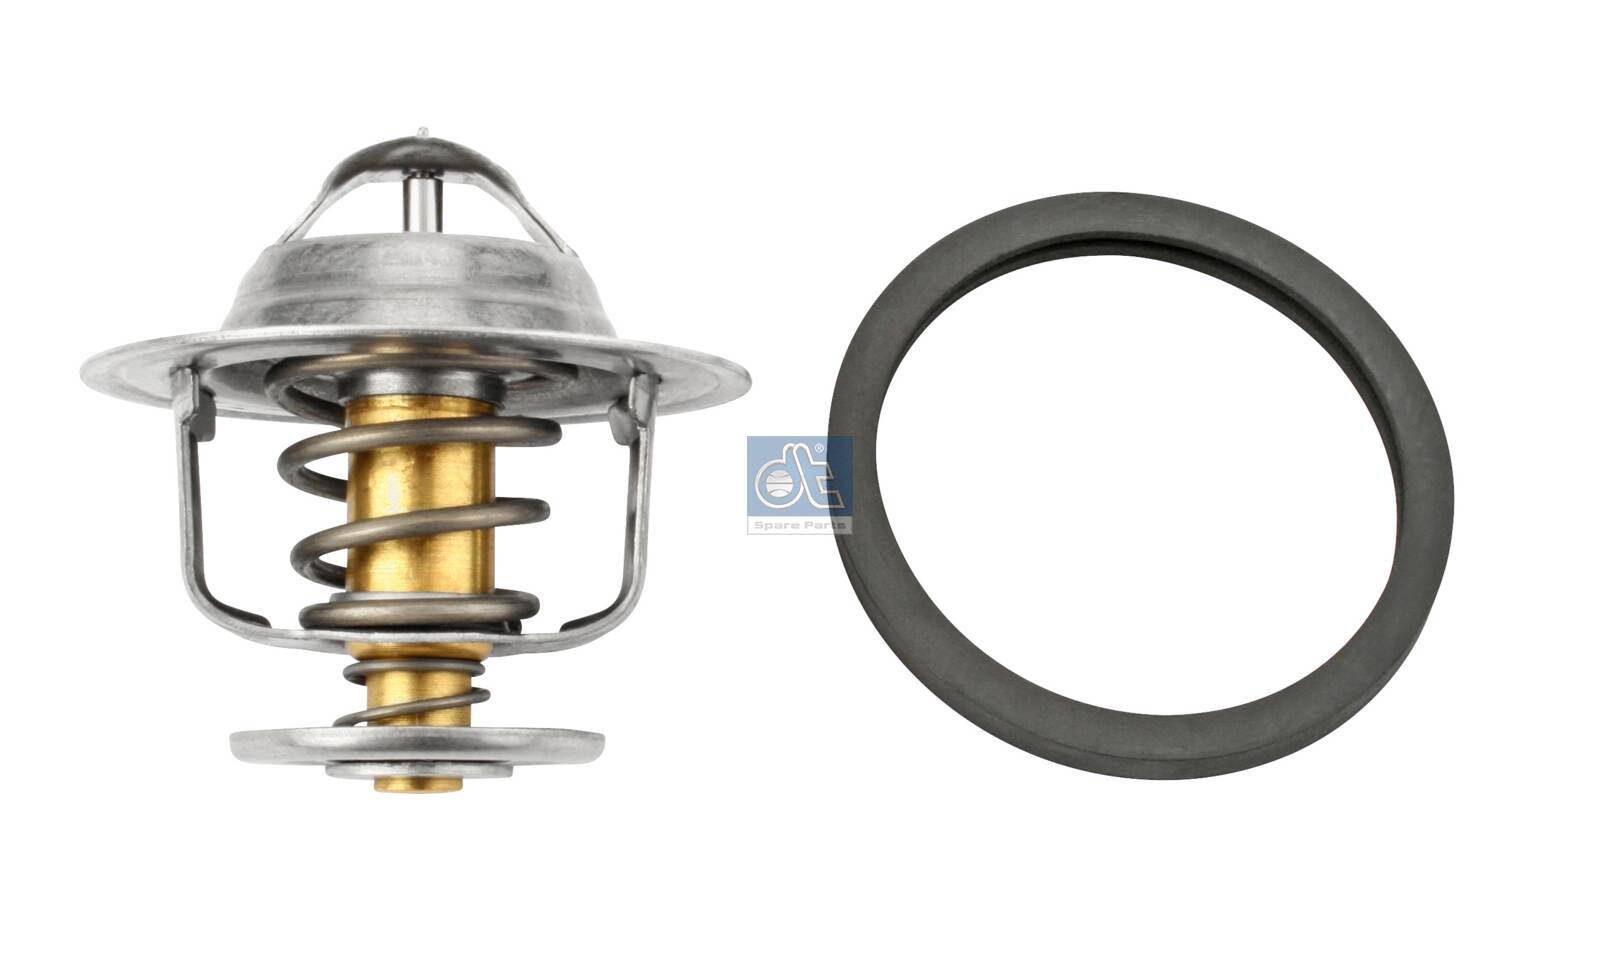 2.91500, Thermostat, coolant, DT Spare Parts, Volvo Truck & Bus & Marine & Industry D39* TD40* TD41* D60* TD60* TD70* D100* TD100* TD120* HD100* THD100* AD31* AD41* , 7467015, 9397551, MD997461, 6889652, 7517345, 876128, 8817538, 875849, 273952, 2733426, 467015, 3831424, 1544098, 241955, 273052, 15440985, 1544390, 037189, 1.145.81.310, 114581310, 11494, 14901100, 1515.81/J, 350224, 4047755500580, 5282810001, 5306681, 580083, 81954DPH, 819882